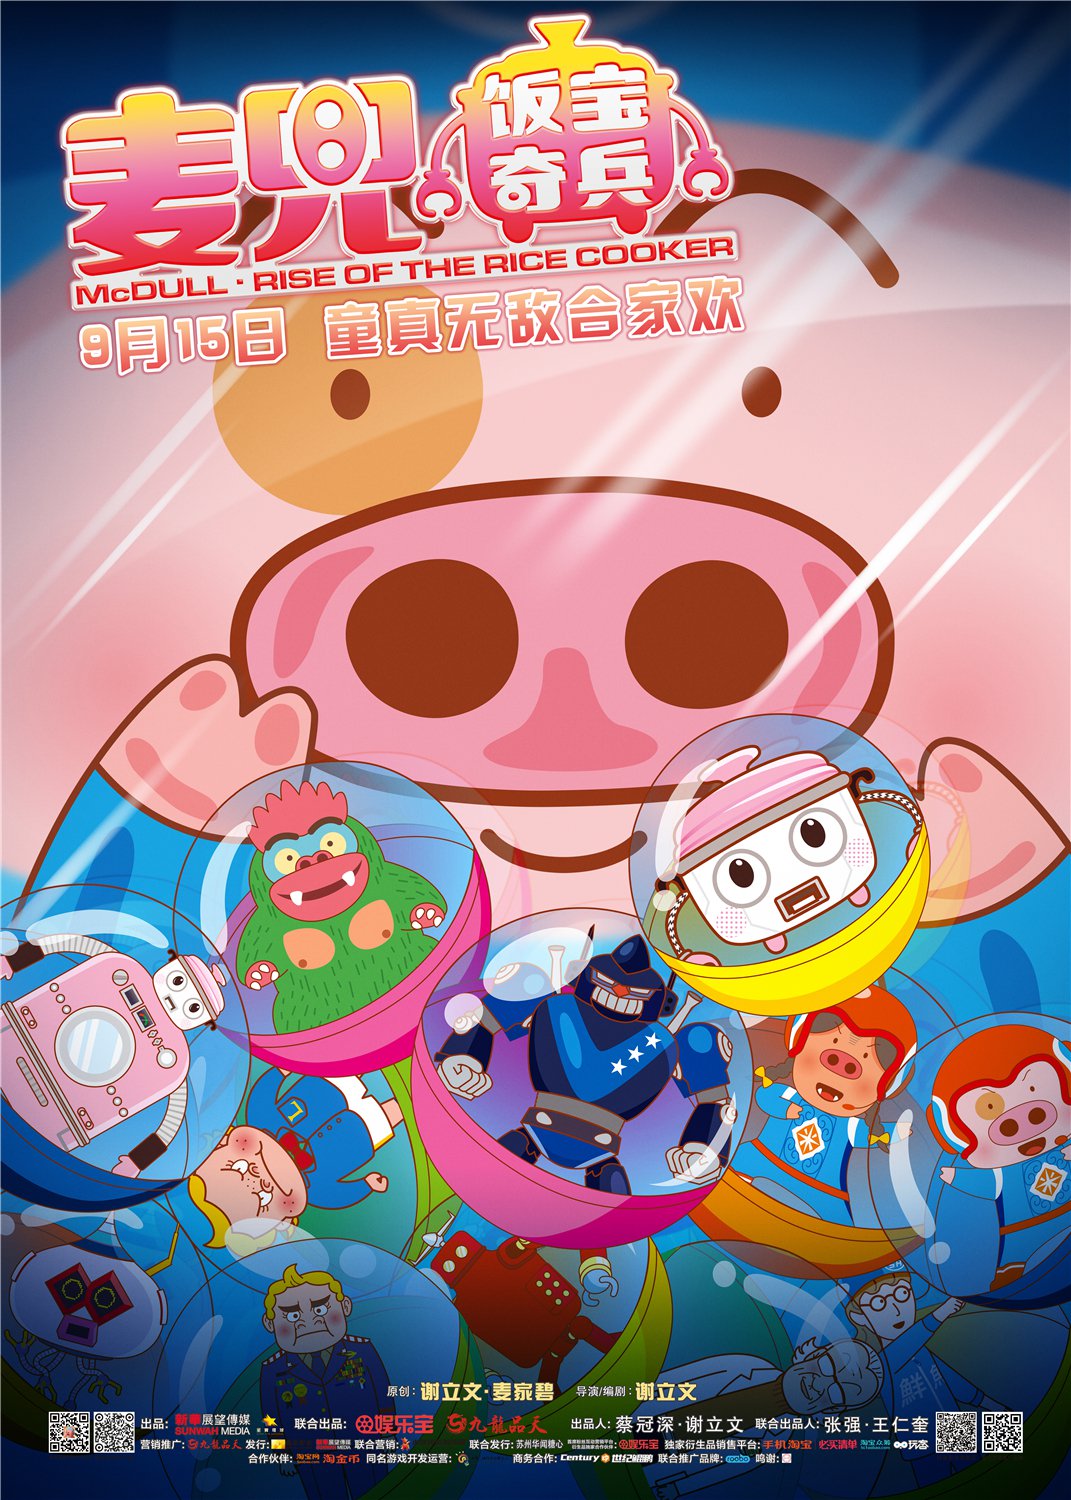 mcdull-rise-of-the-rice-cooker-2016